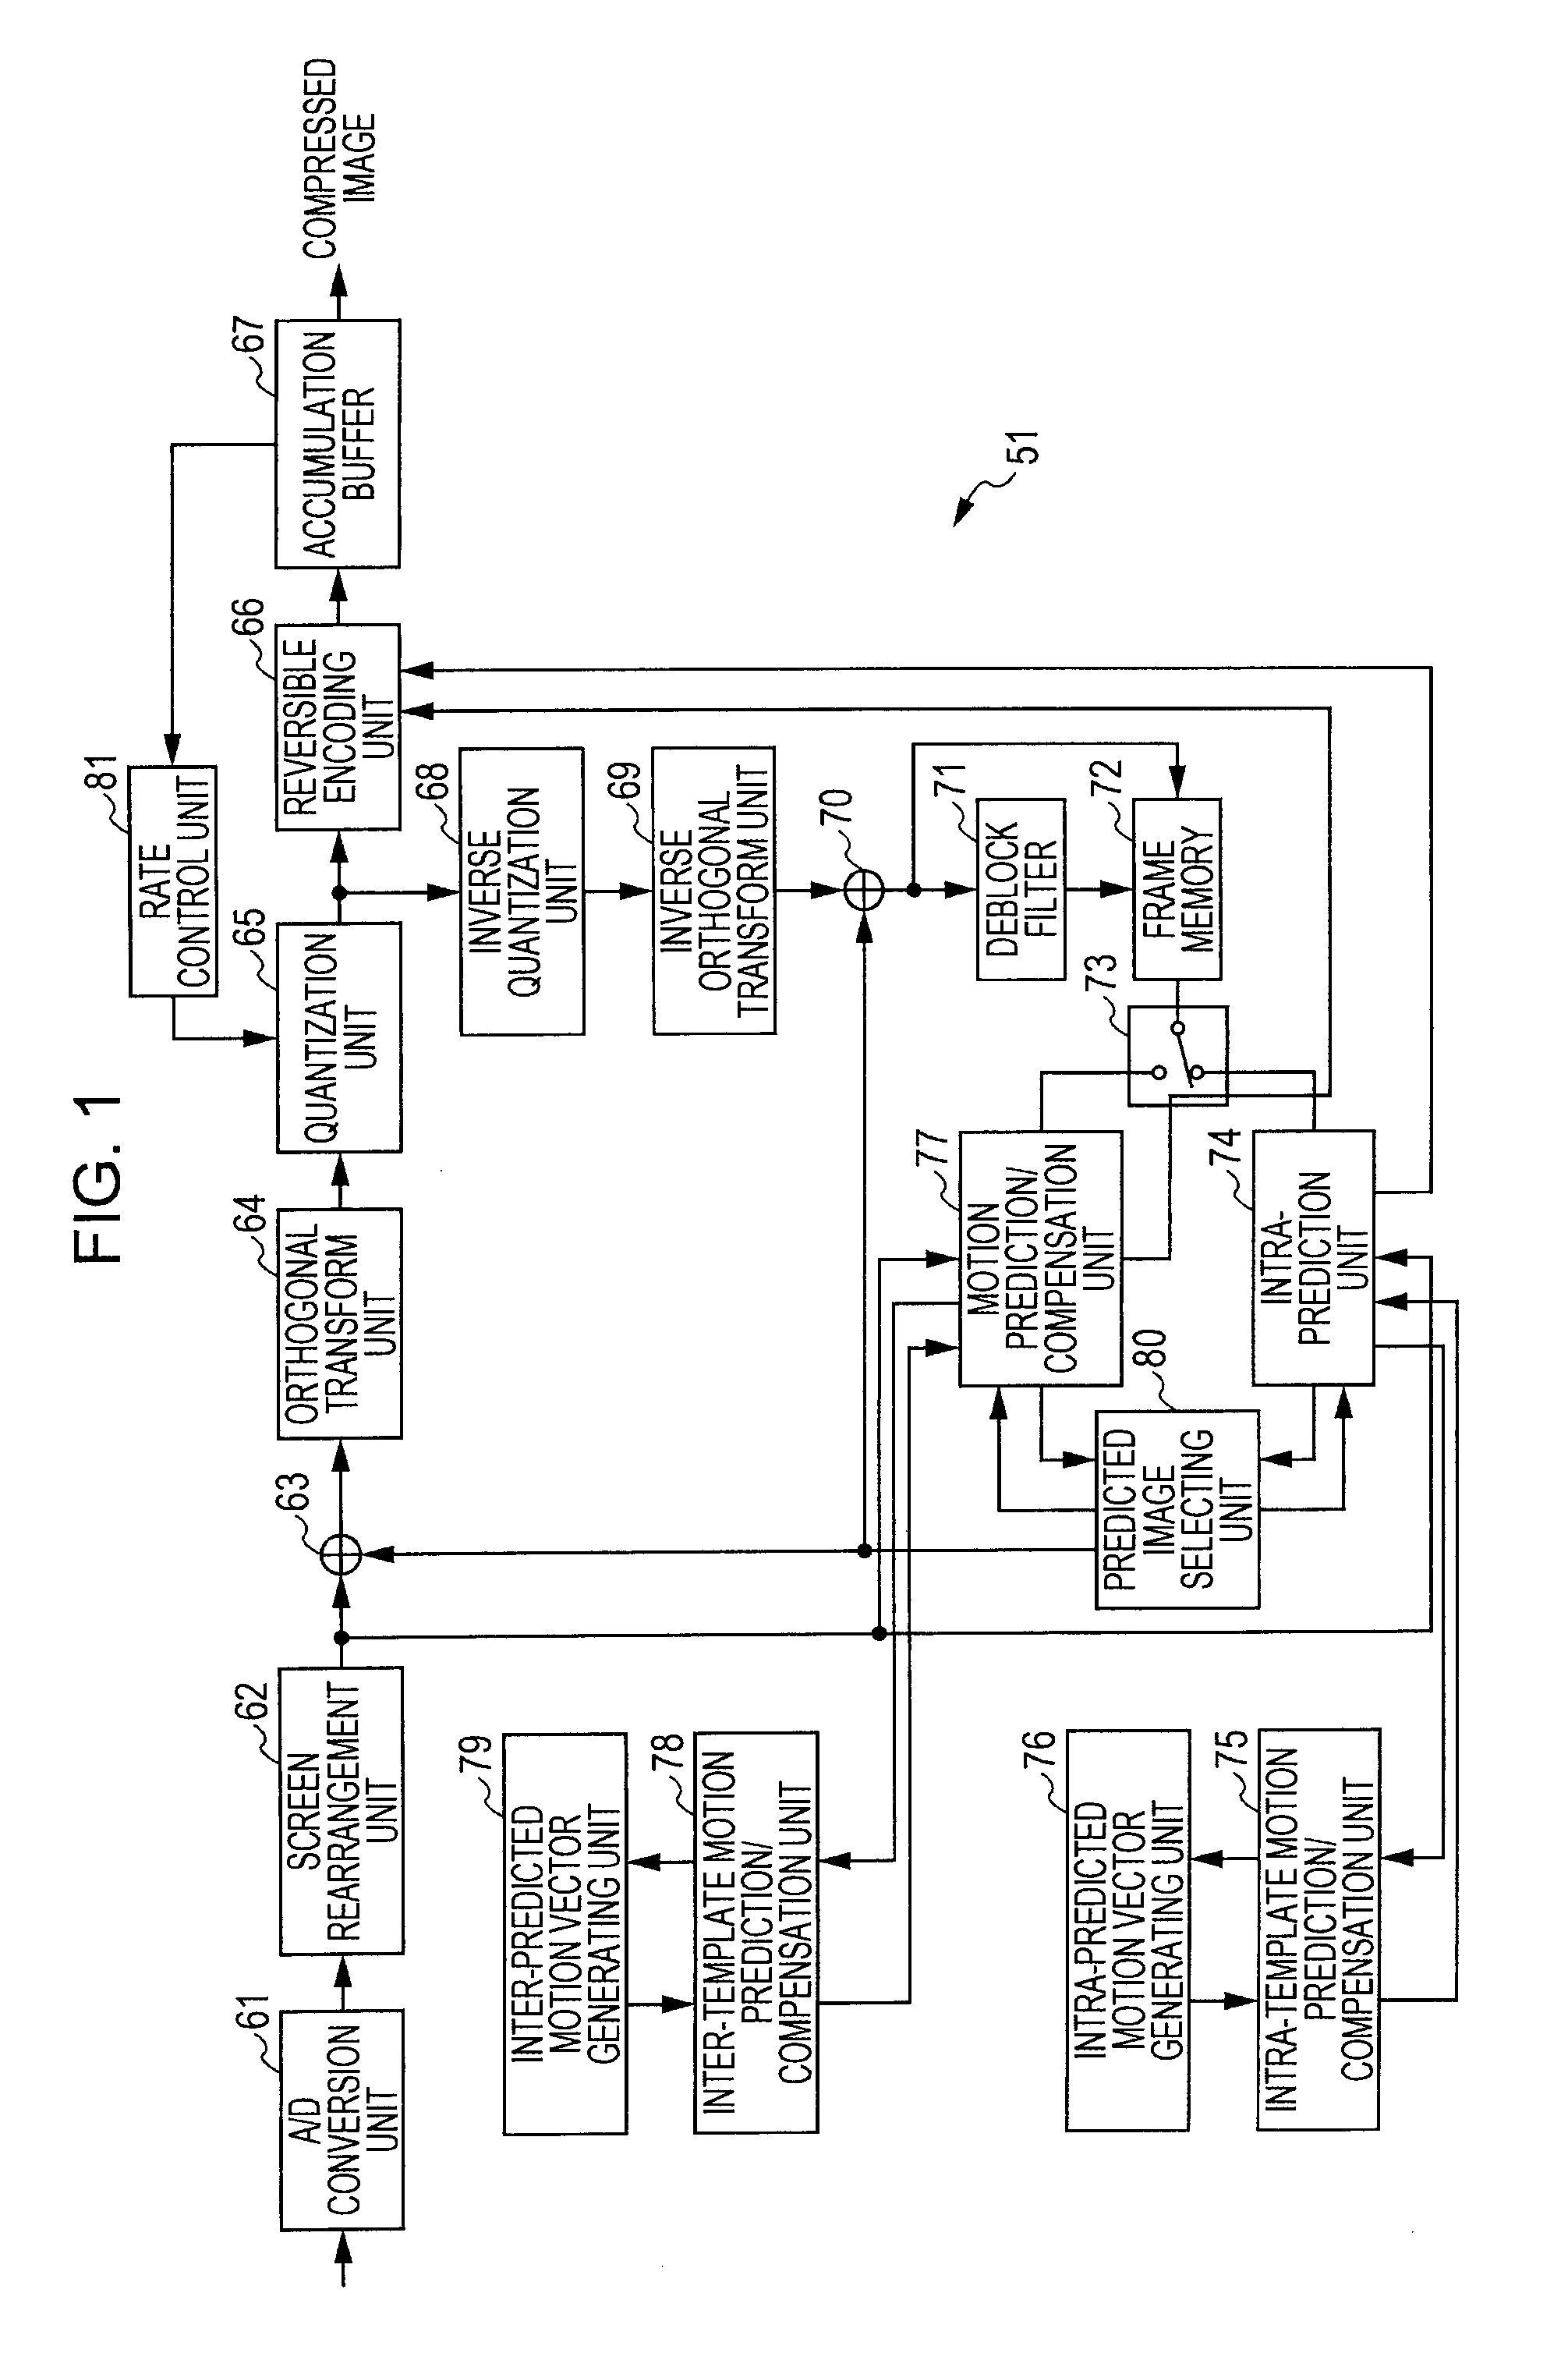 Image Processing Apparatus and Method